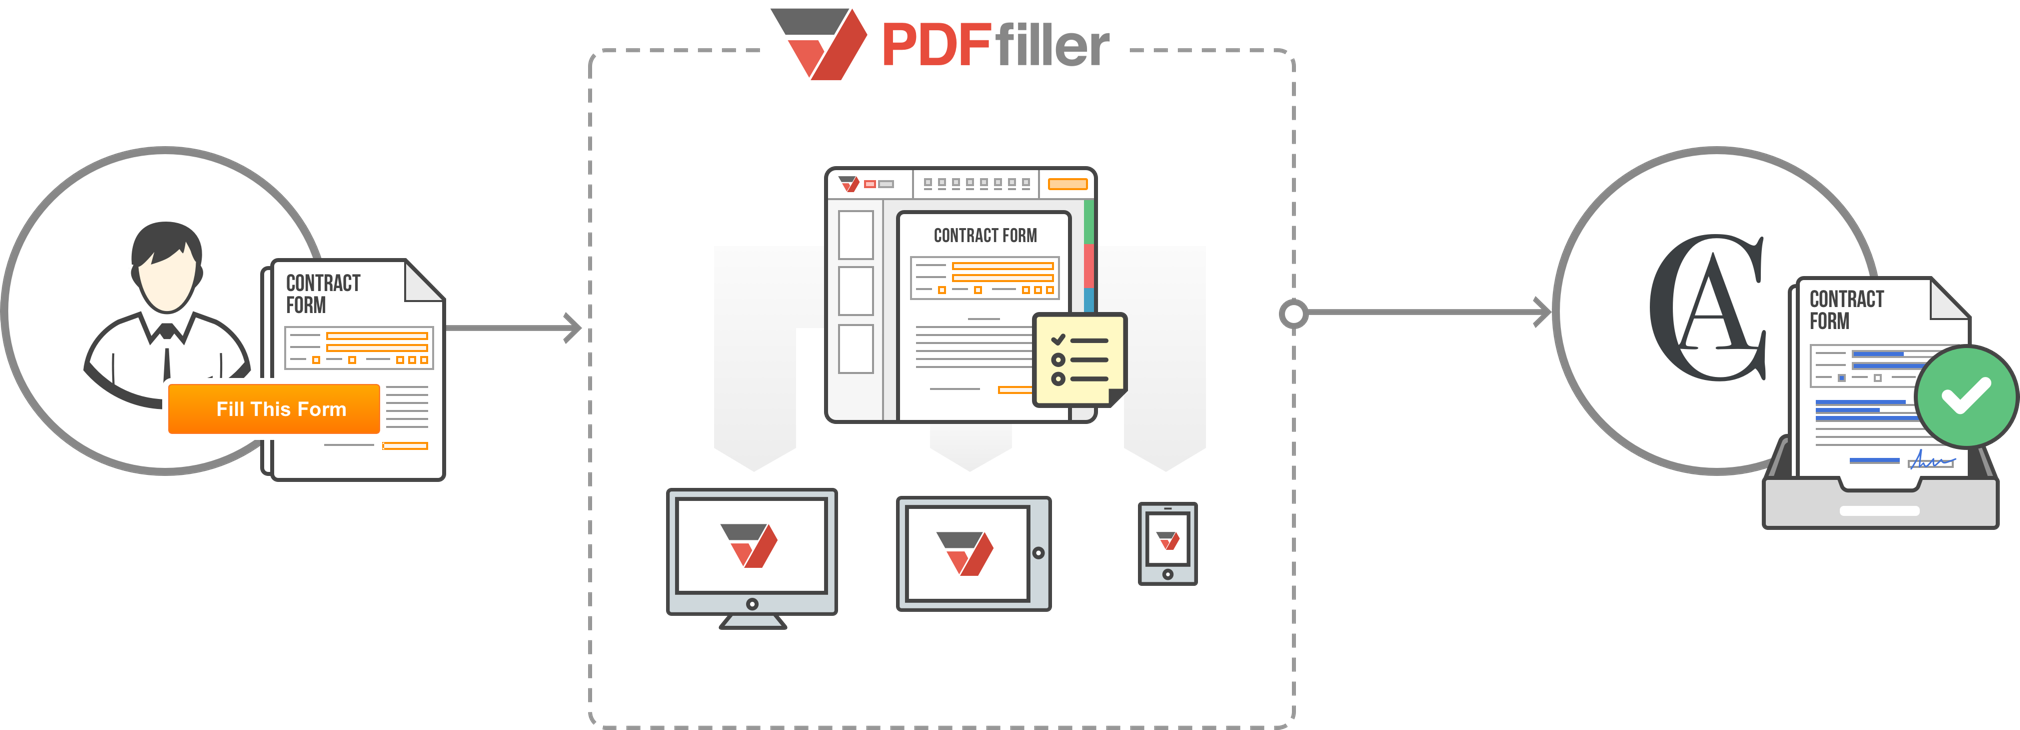 Fig B. Filling and sending contract form by the user with PDFfiller.